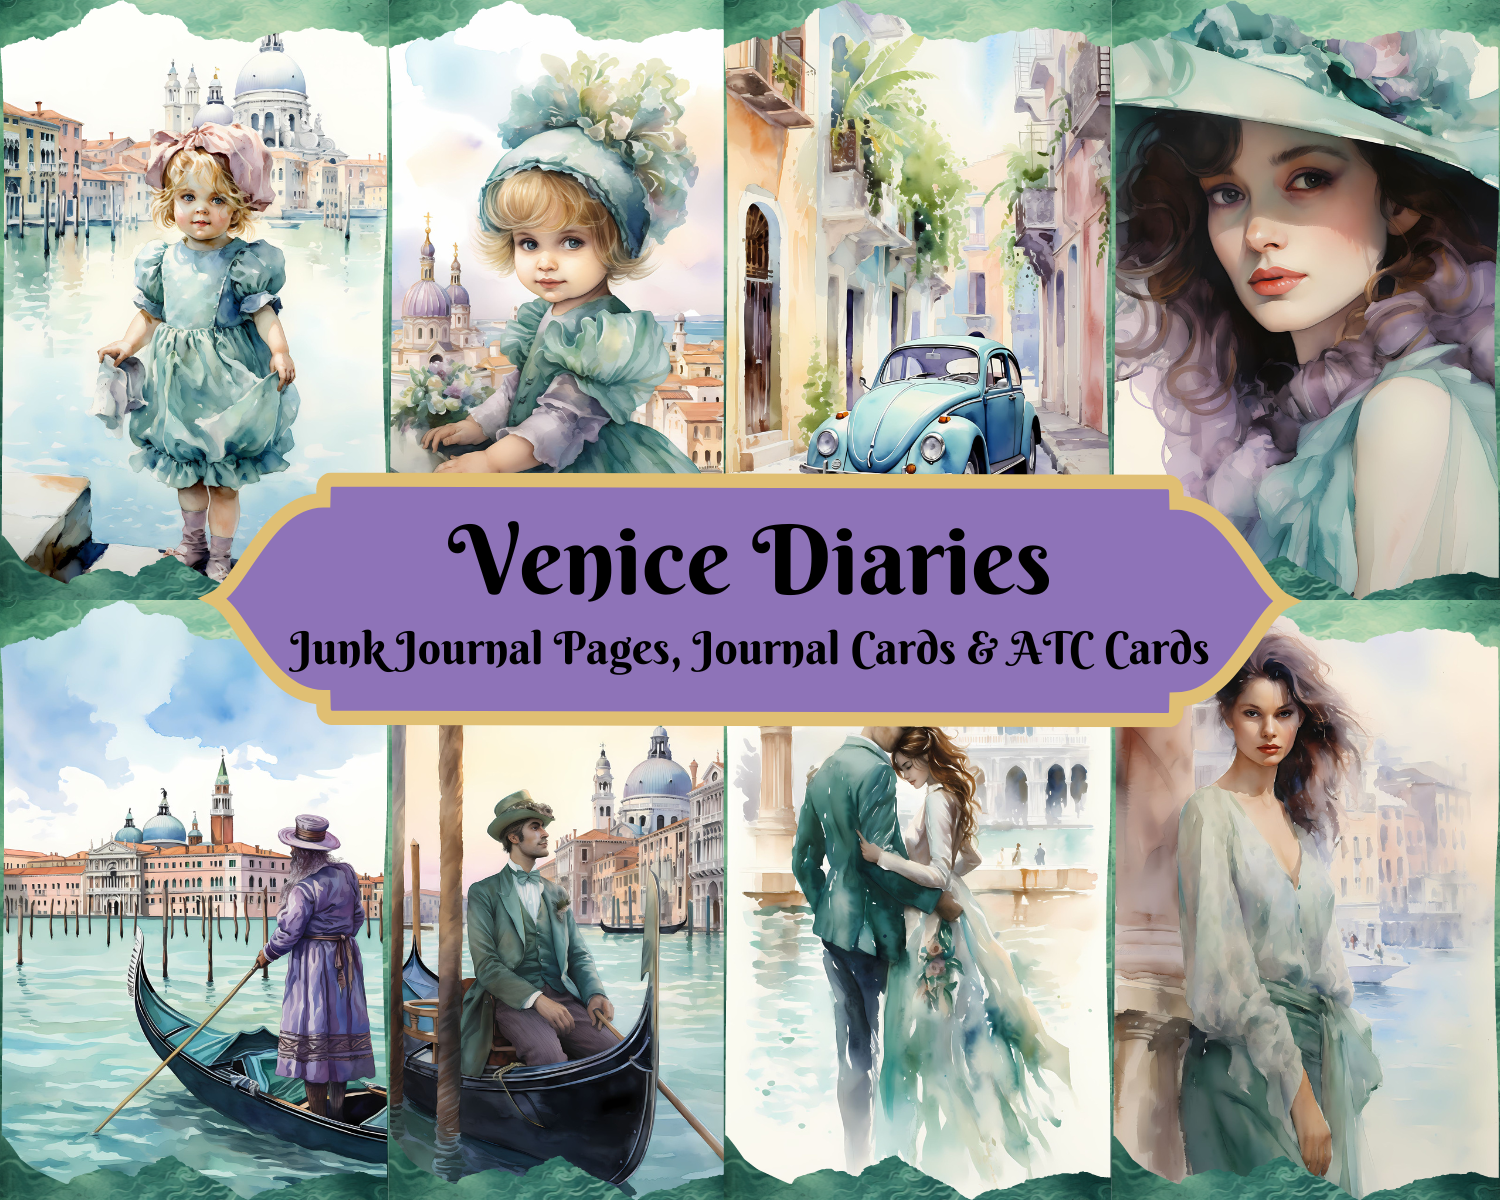 Venice Diaries - Printable Junk Journal Pages, Journal Cards, ATC Cards, Digital Download